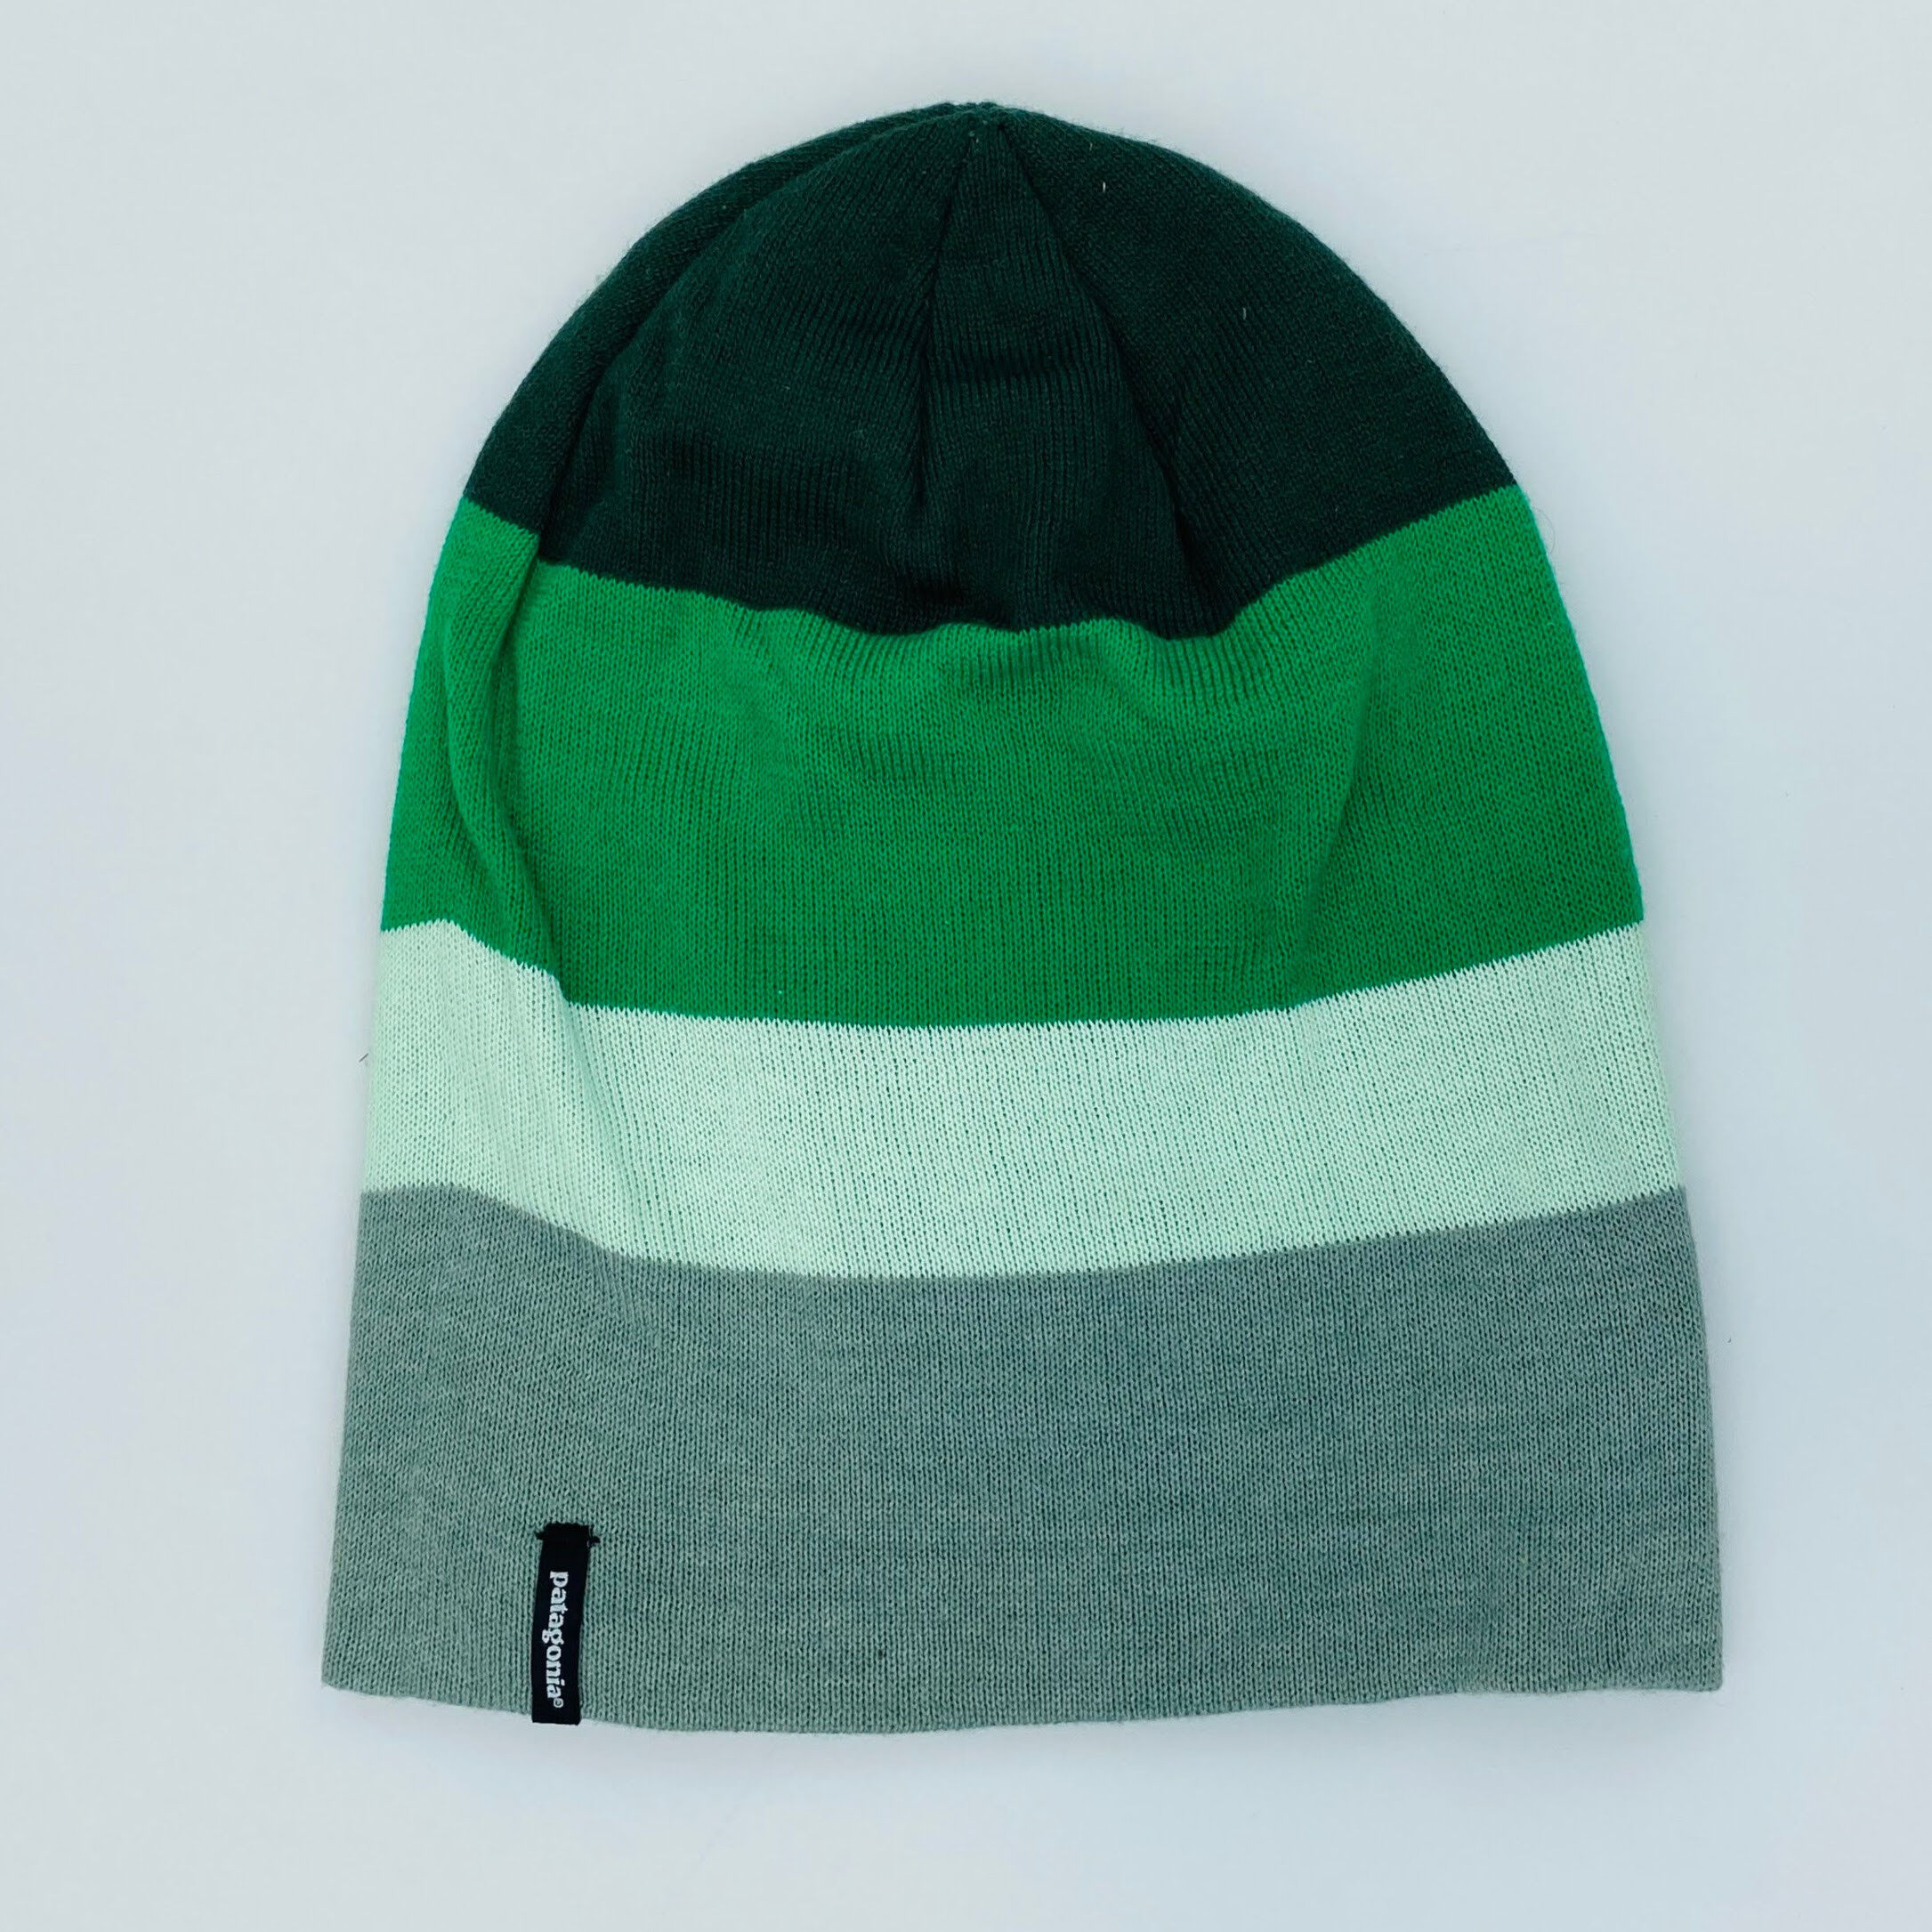 Patagonia Slopestyle Beanie - Second Hand Beanie - Green - One Size | Hardloop